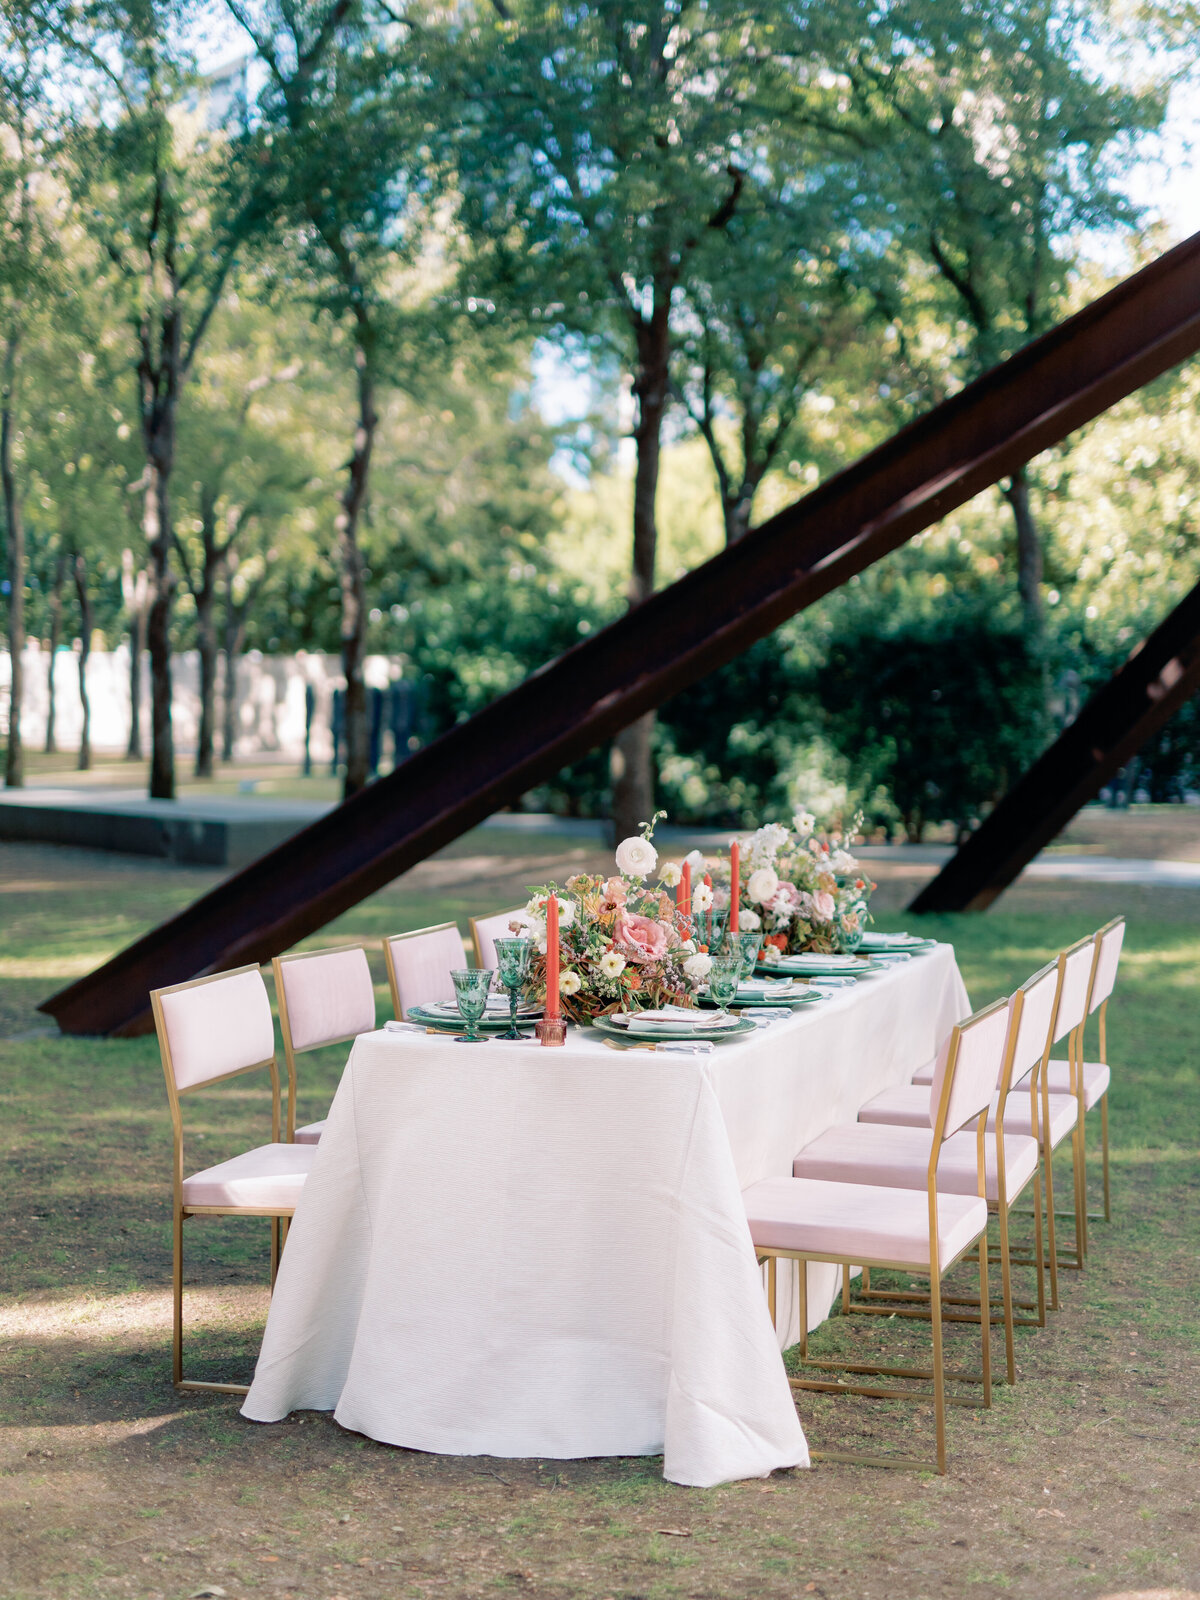 Nasher-Sculpture-Center-Dallas-Texas-DFW-TX-Weddings-Events-Outdoor-Garden-Party-Whimsical-Modern-Art-Museum-Romantic-Fall-Transition-Colors-Spring-Pink-Green-Linear-Ruffles-Turn-The-Paige-Events-Kelsey-LaNae-Photography-0129